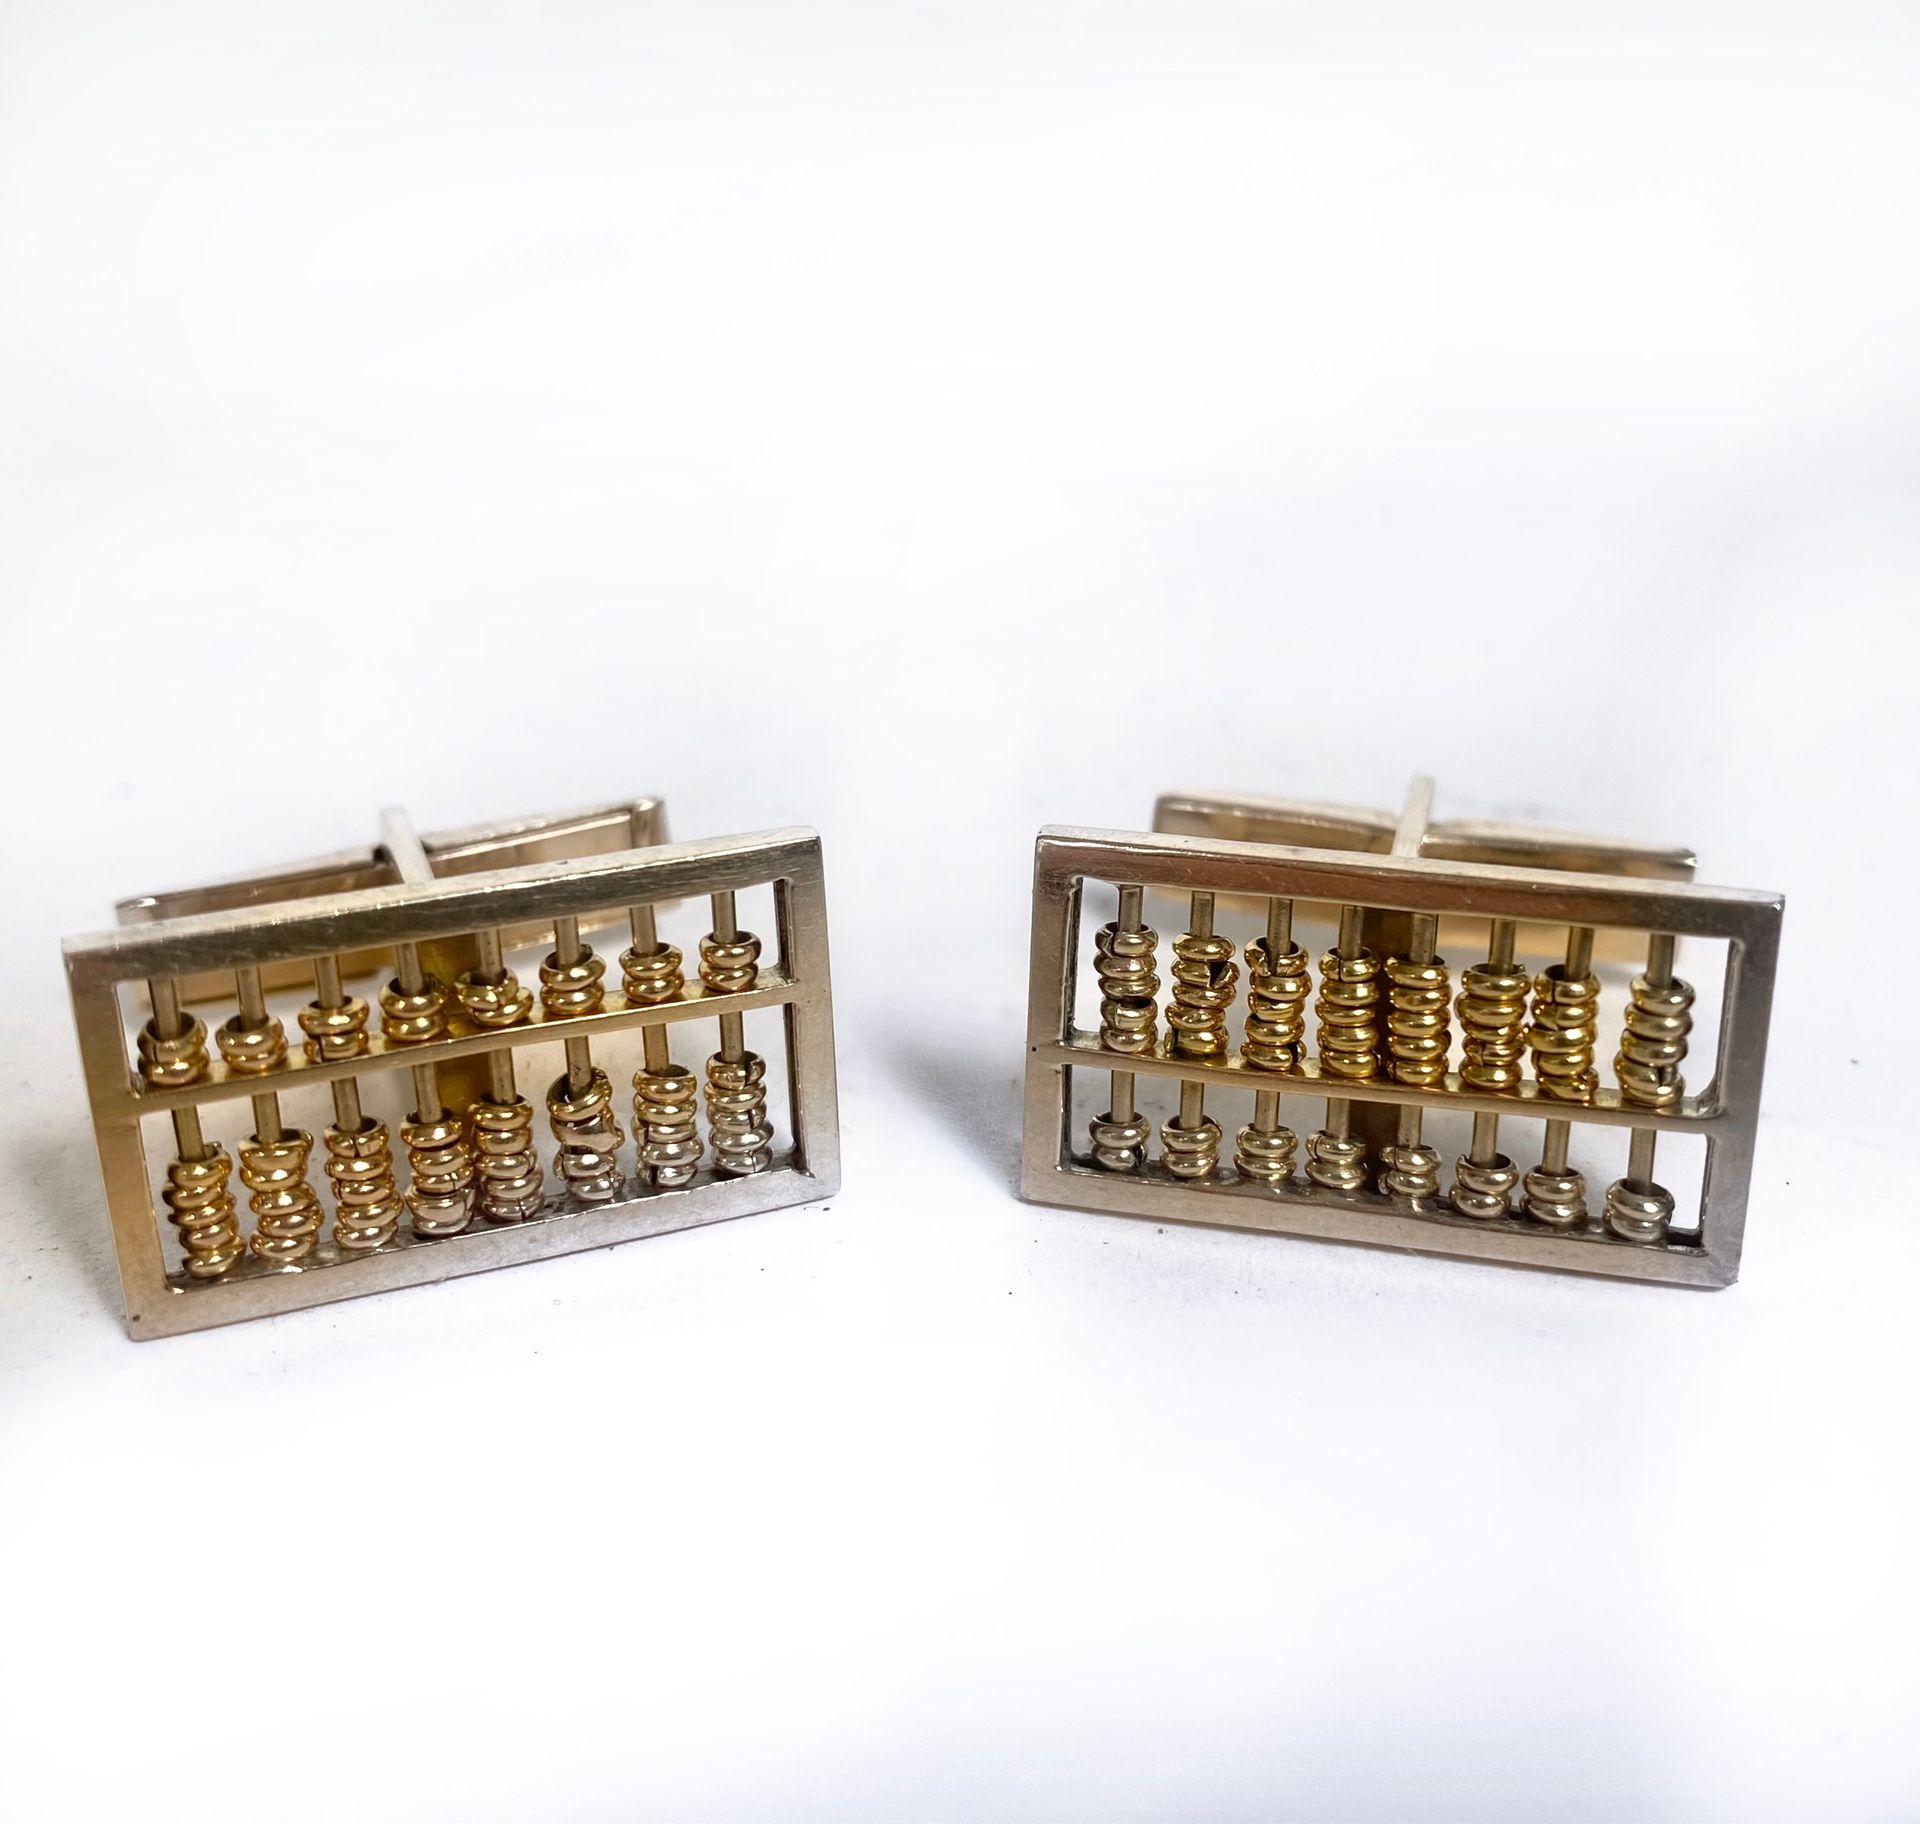 Null Pair of gold cufflinks in the shape of an abacus

11.6 grams